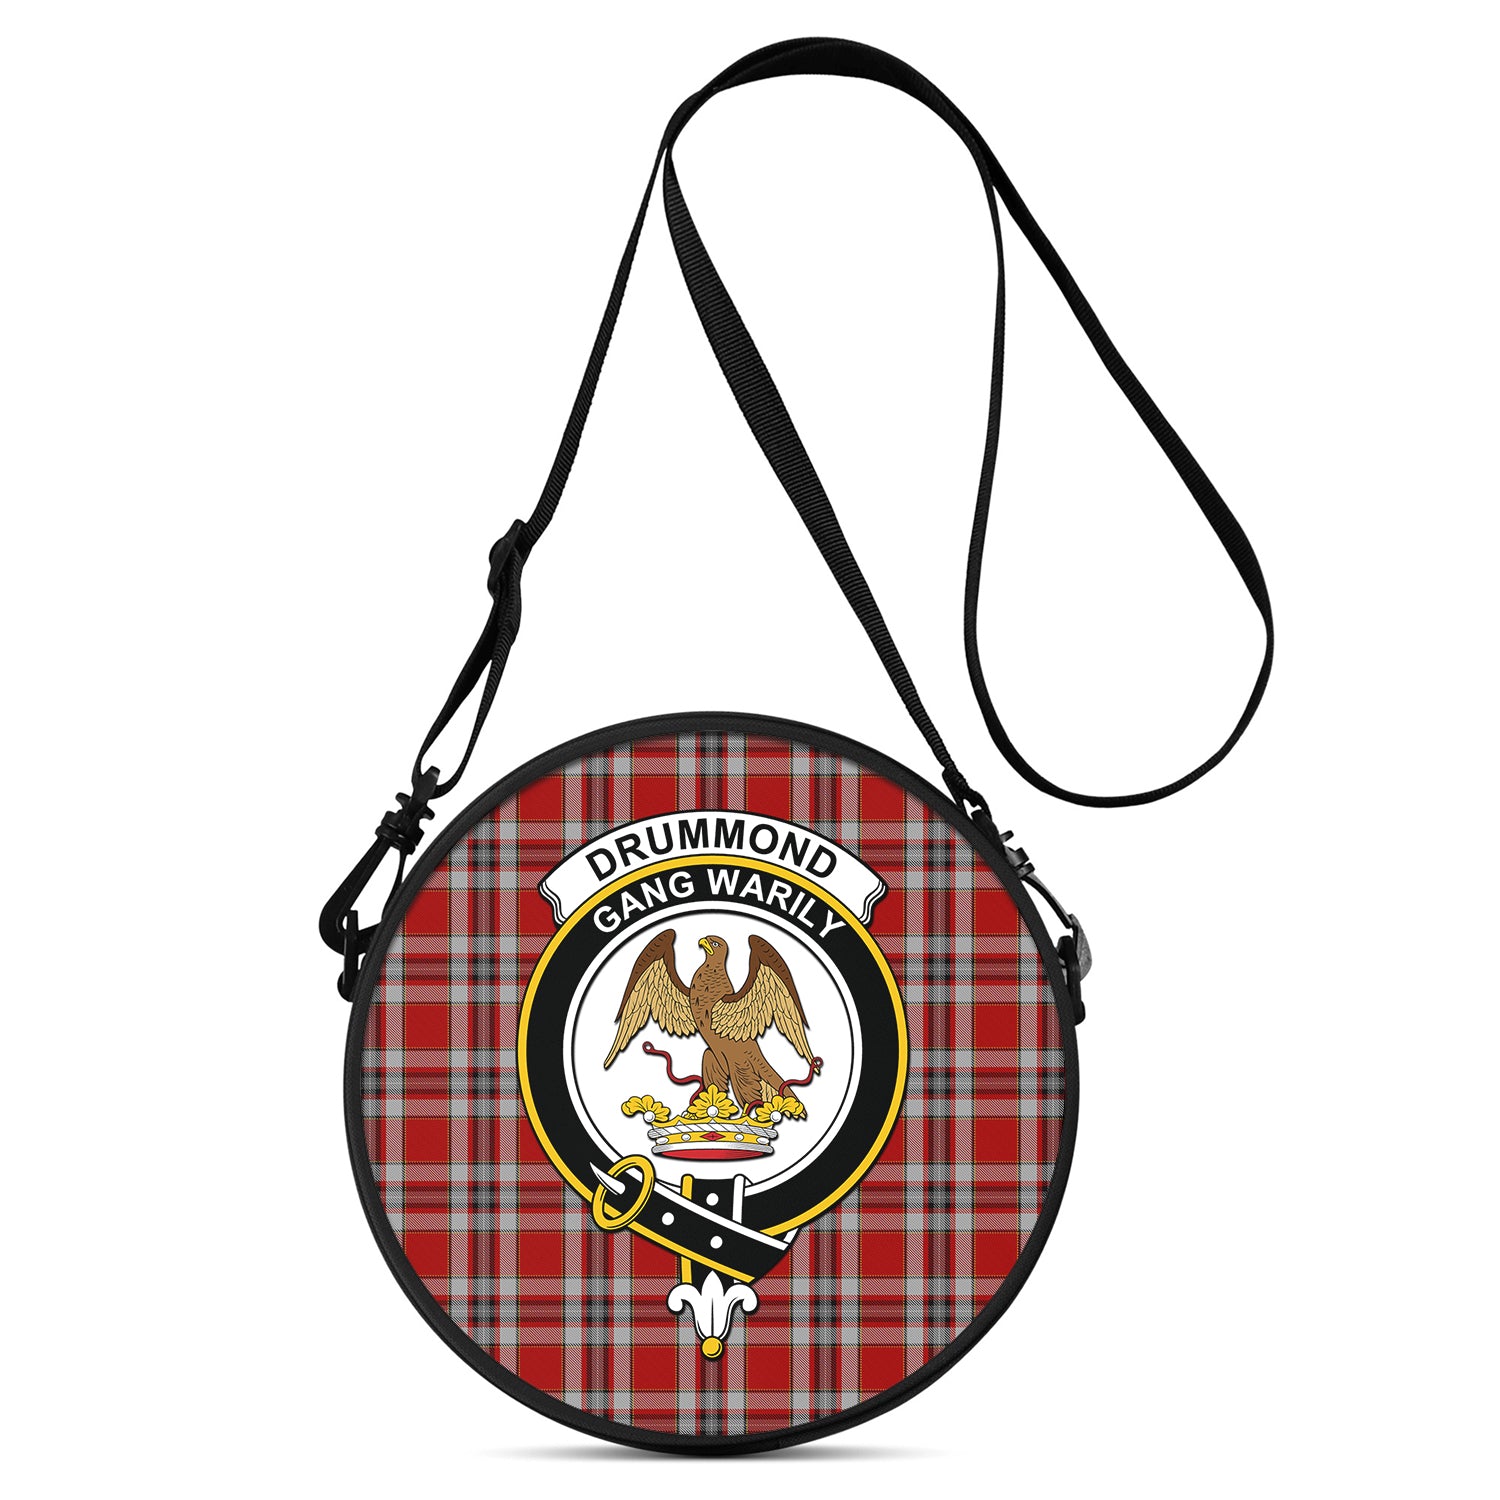 drummond-of-perth-dress-tartan-round-satchel-bags-with-family-crest